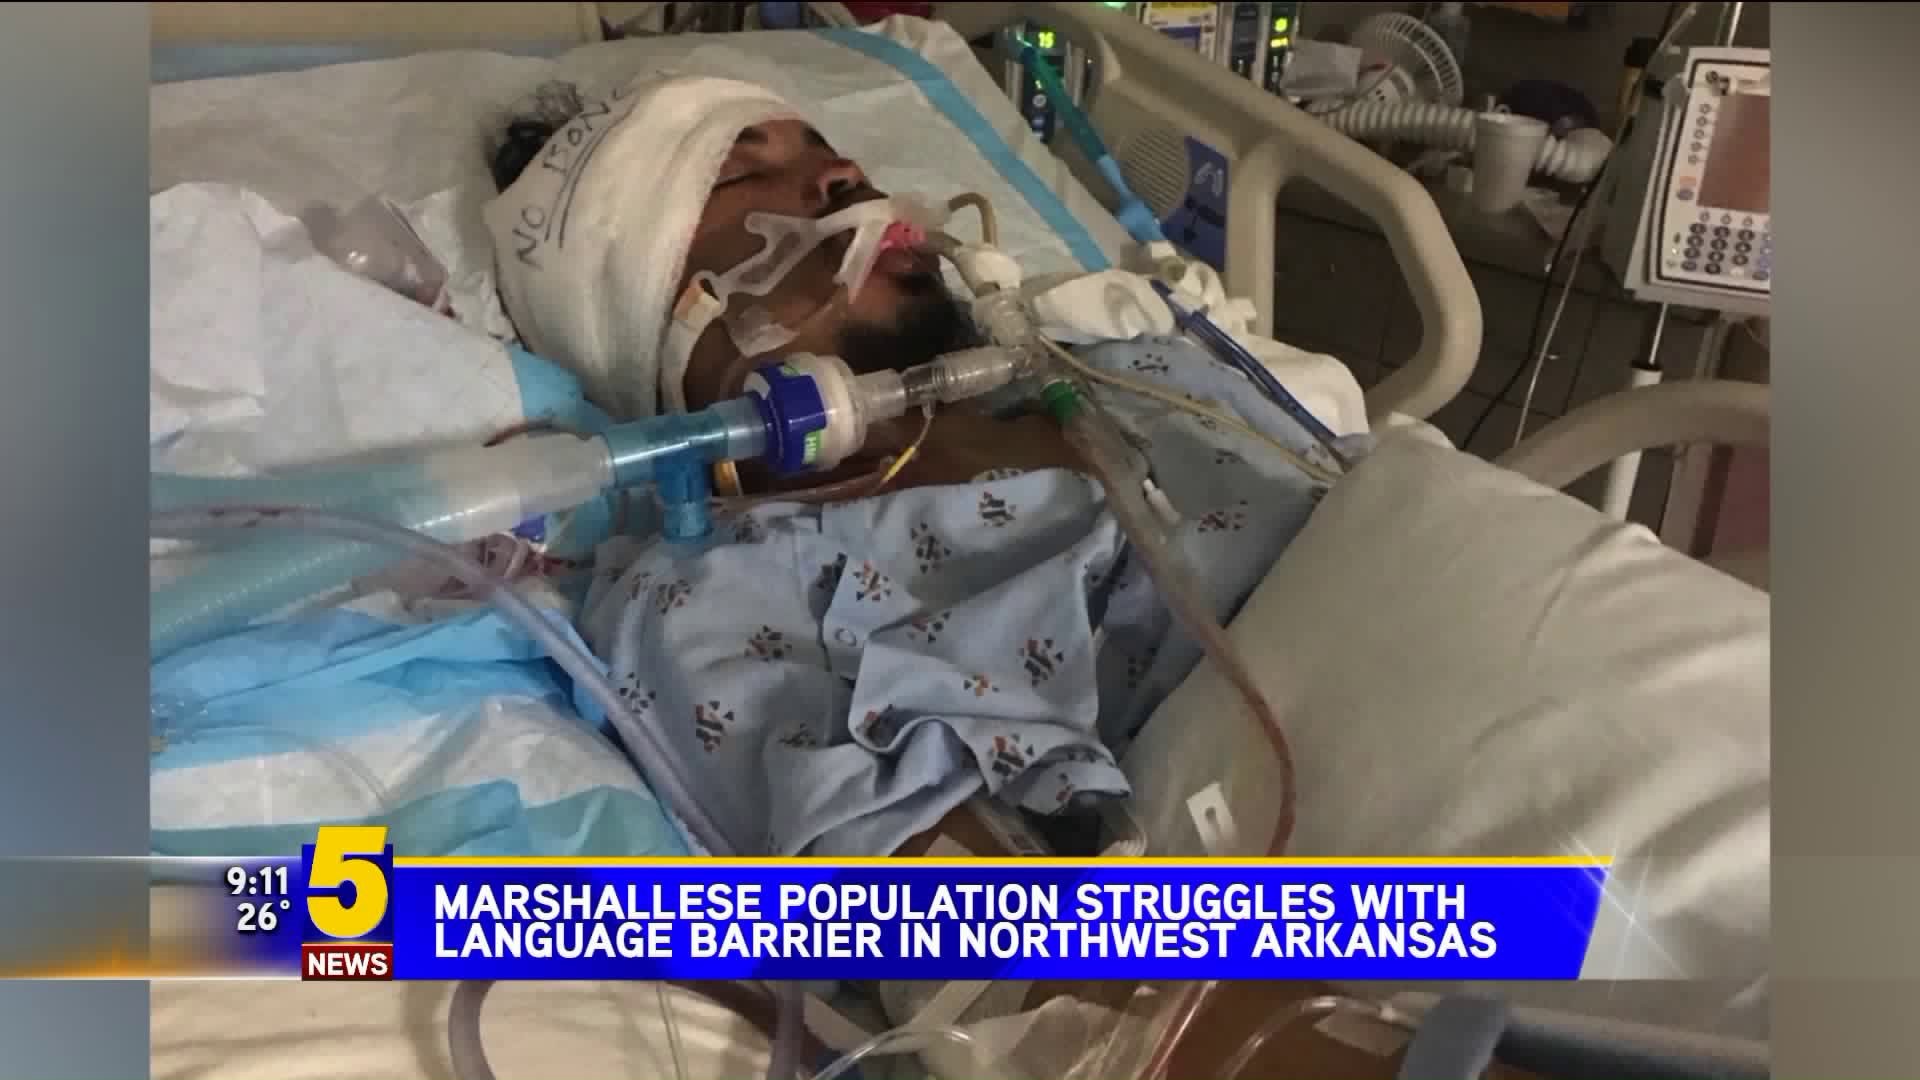 Marshallese Population Struggles With Language Barrier In NWA